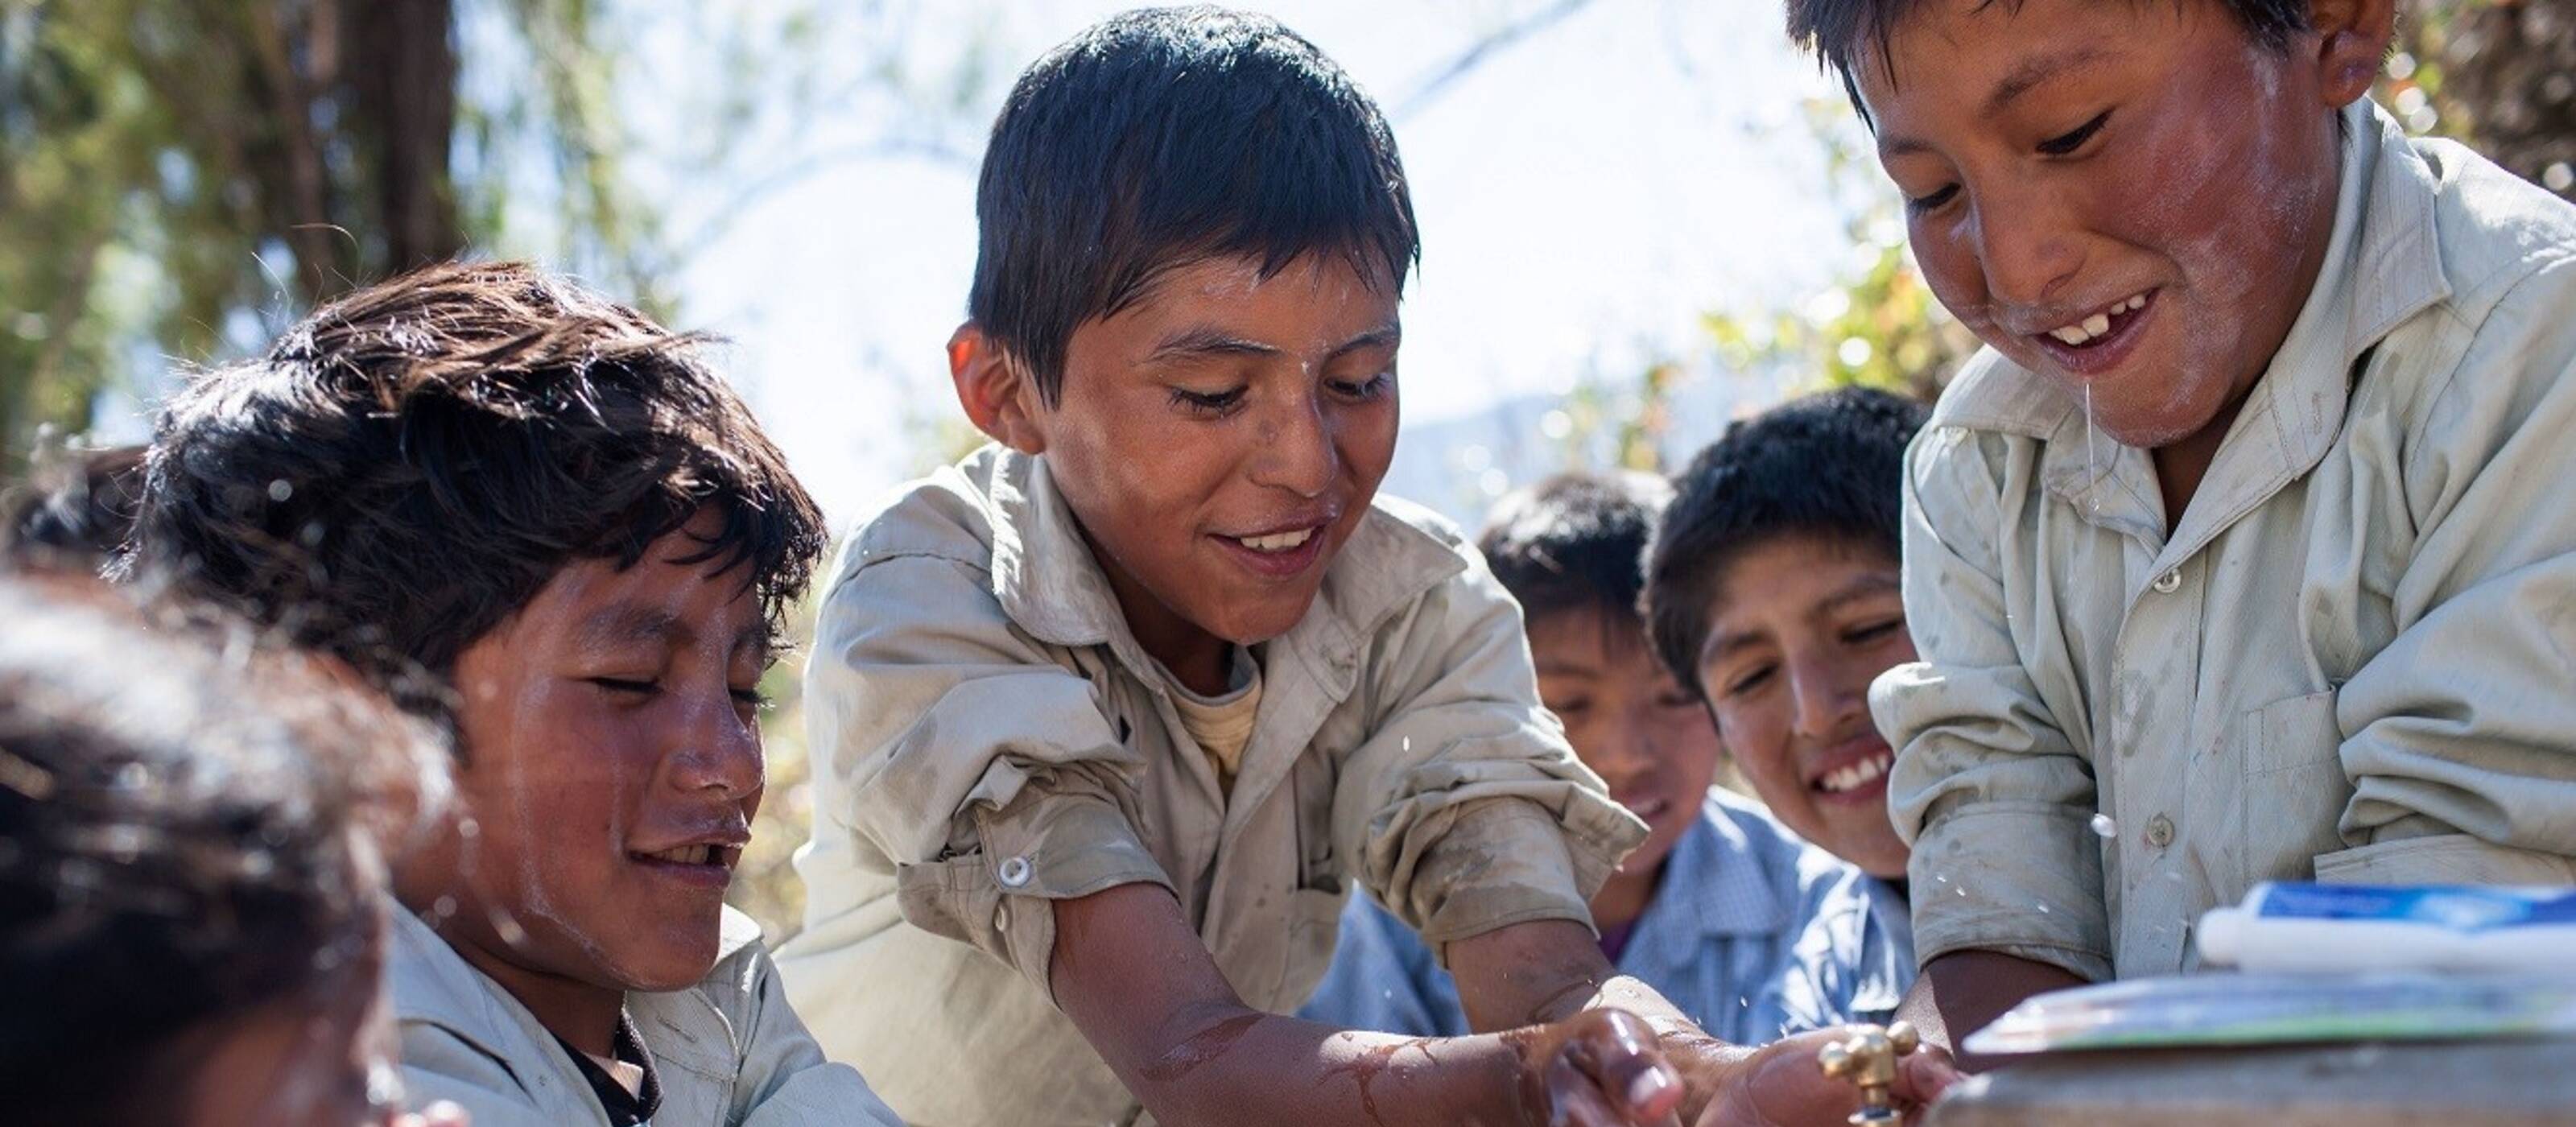 Children in Bolivia wash themselves at a well